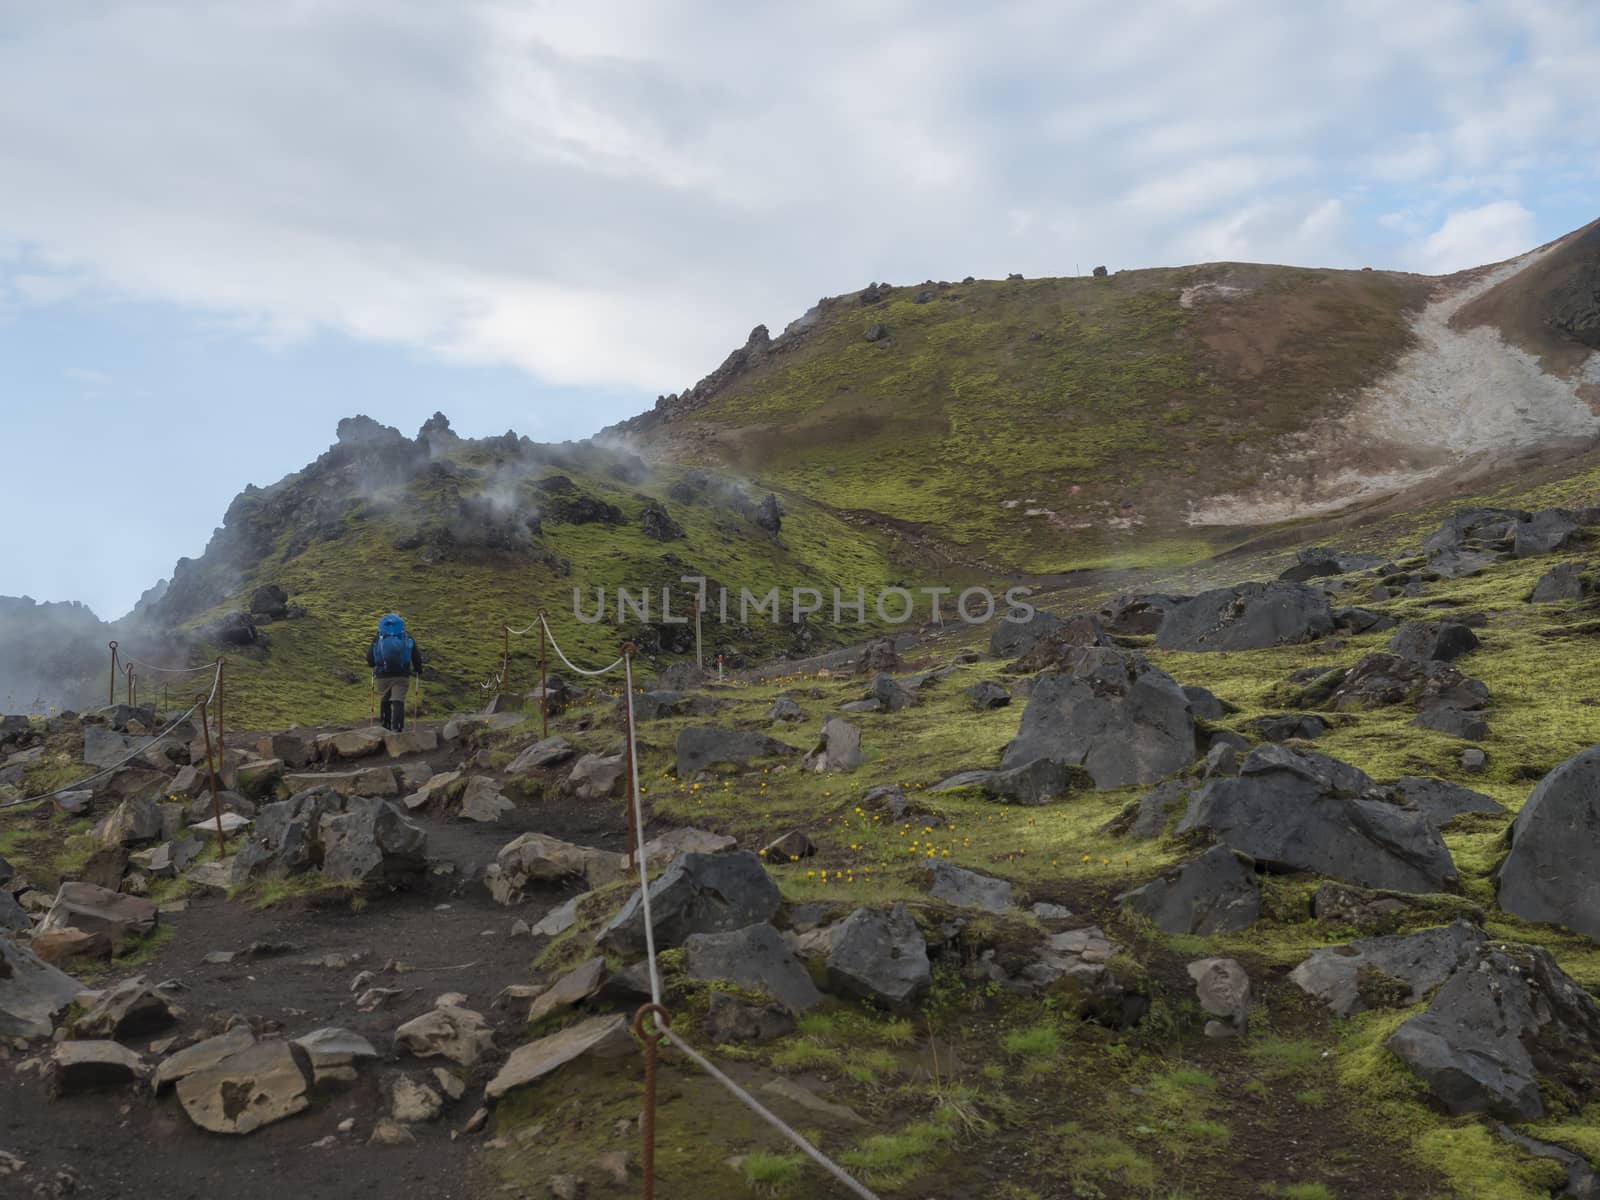 Hiker with blue backpack on Laugavegur trek in Colorful Rhyolit rainbow mountain with multicolored volcanos and geothermal fumarole. Landmannalaugar at Fjallabak Nature Reserve, Highlands Iceland.